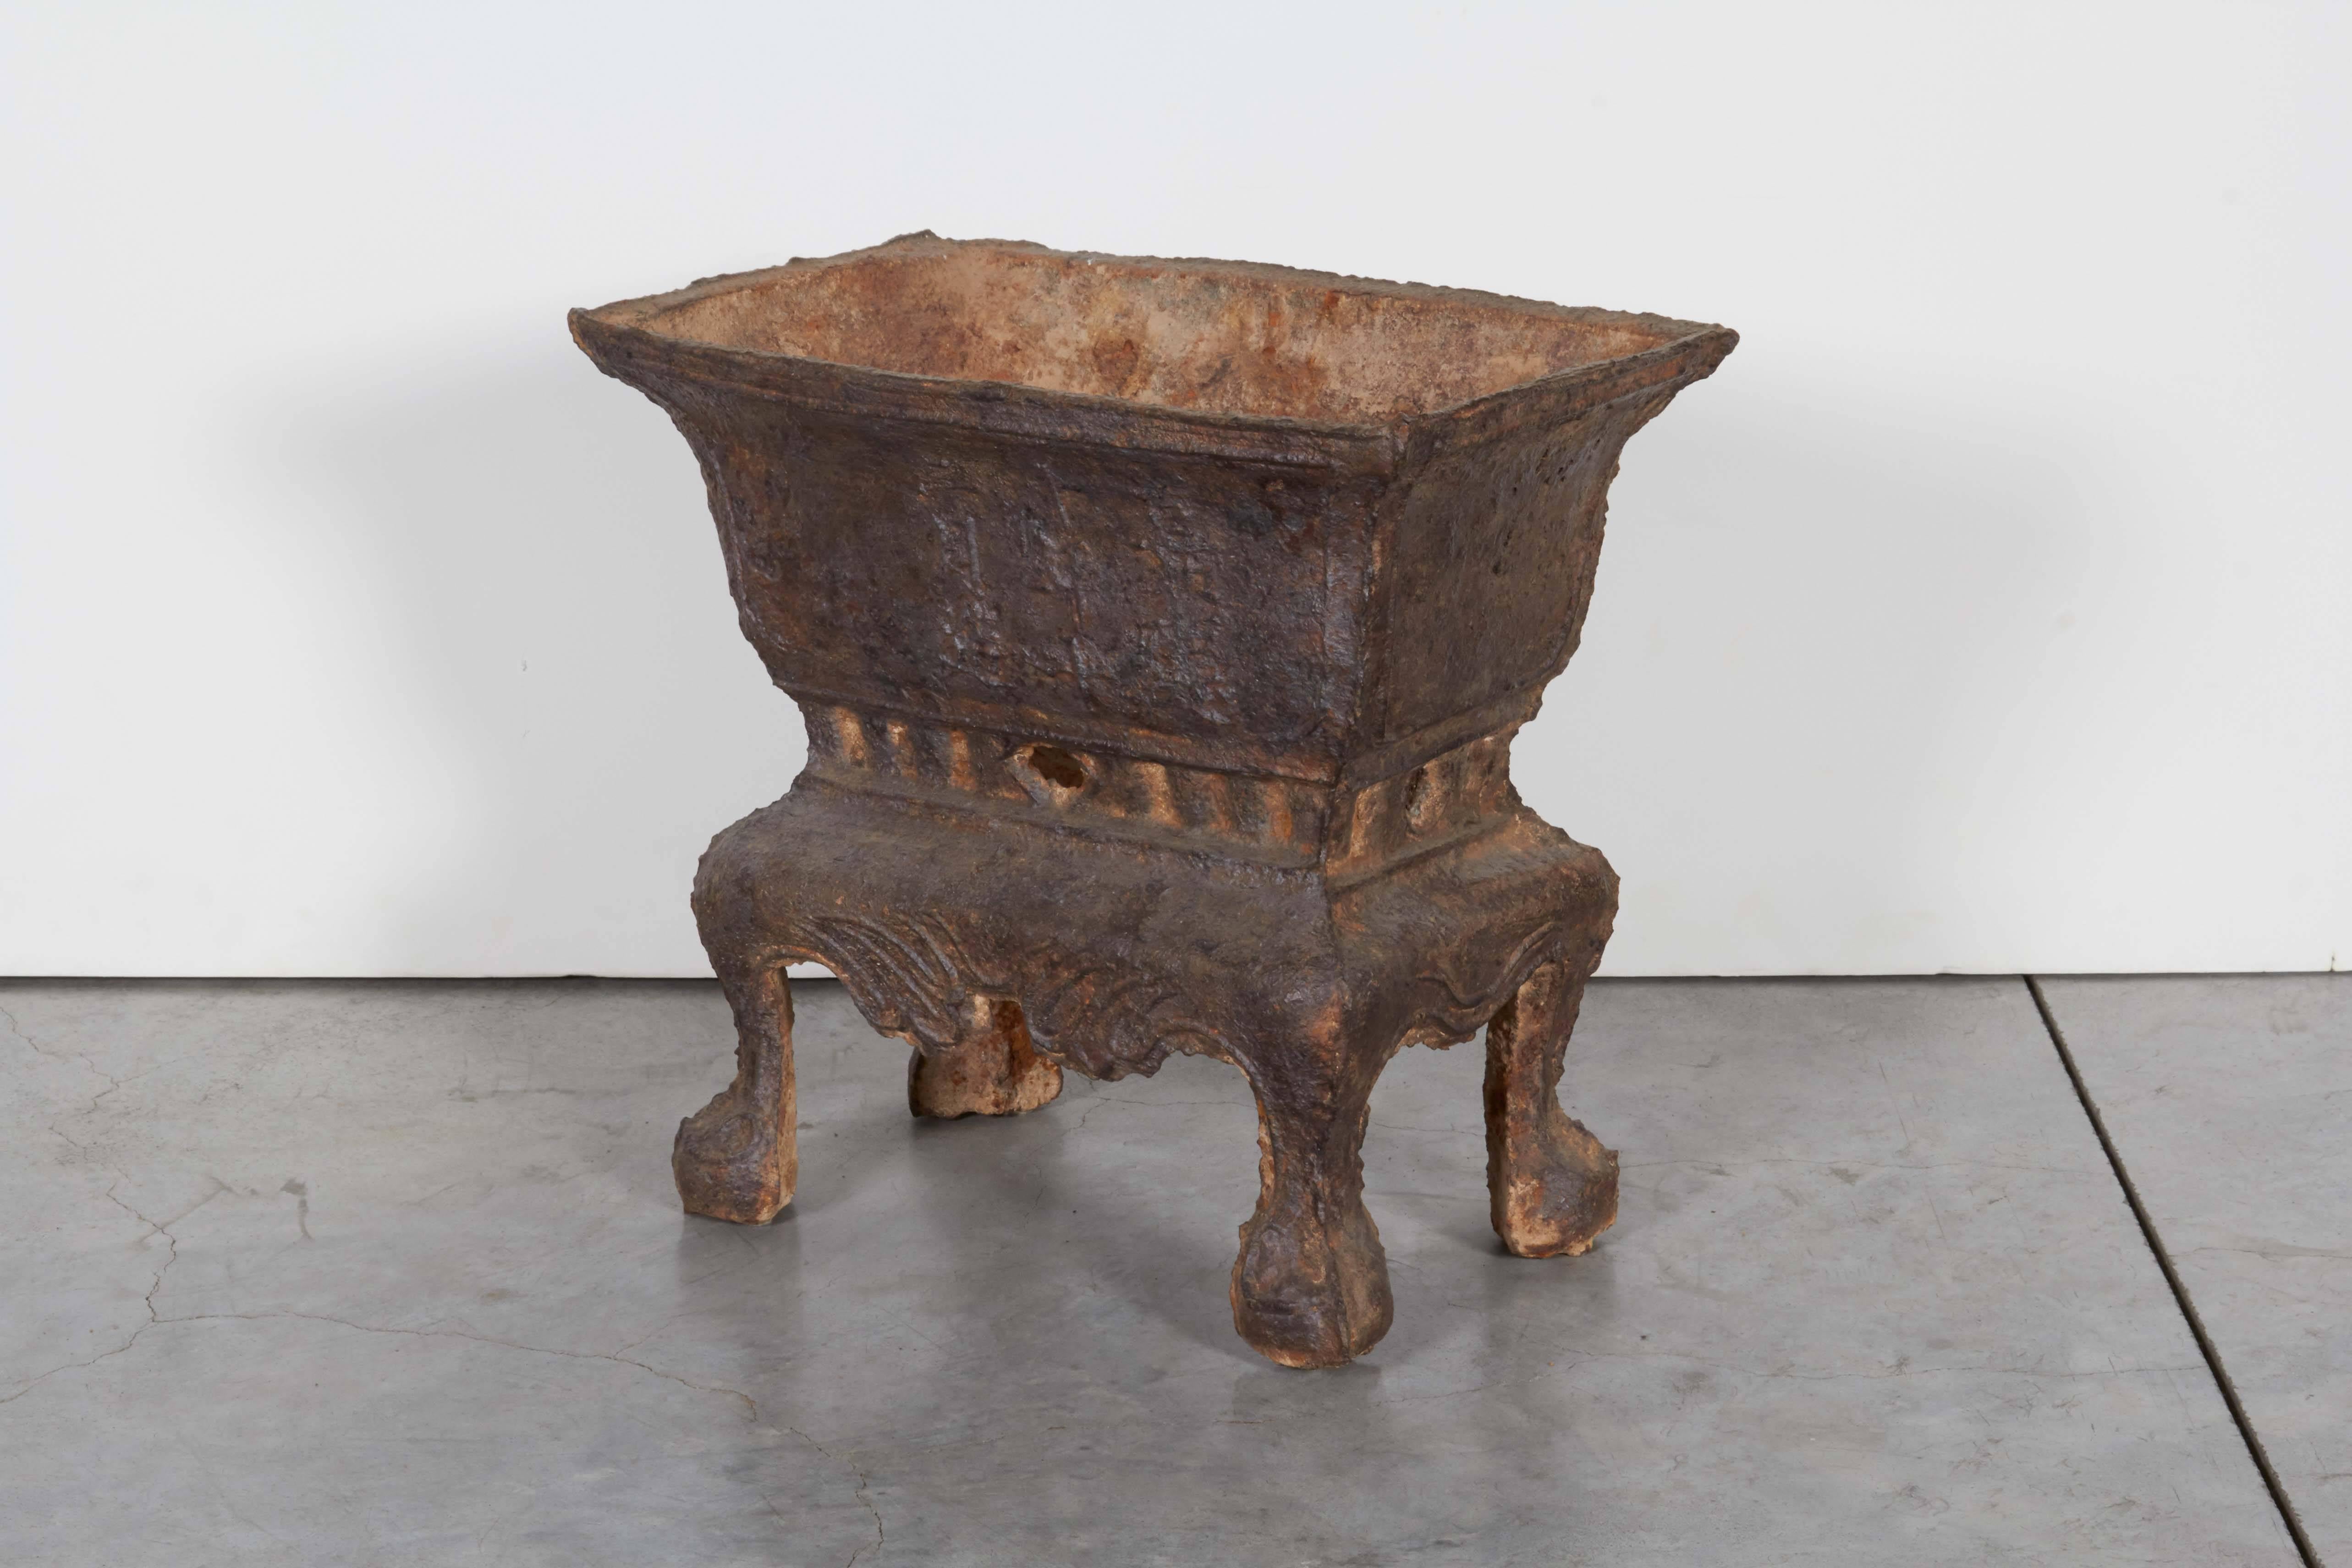 A large and exquisitely detailed early 19th century cast iron incense burner raised on four graceful legs with clear Chinese characters. From Shanxi Province, circa 1800.
M599.
 